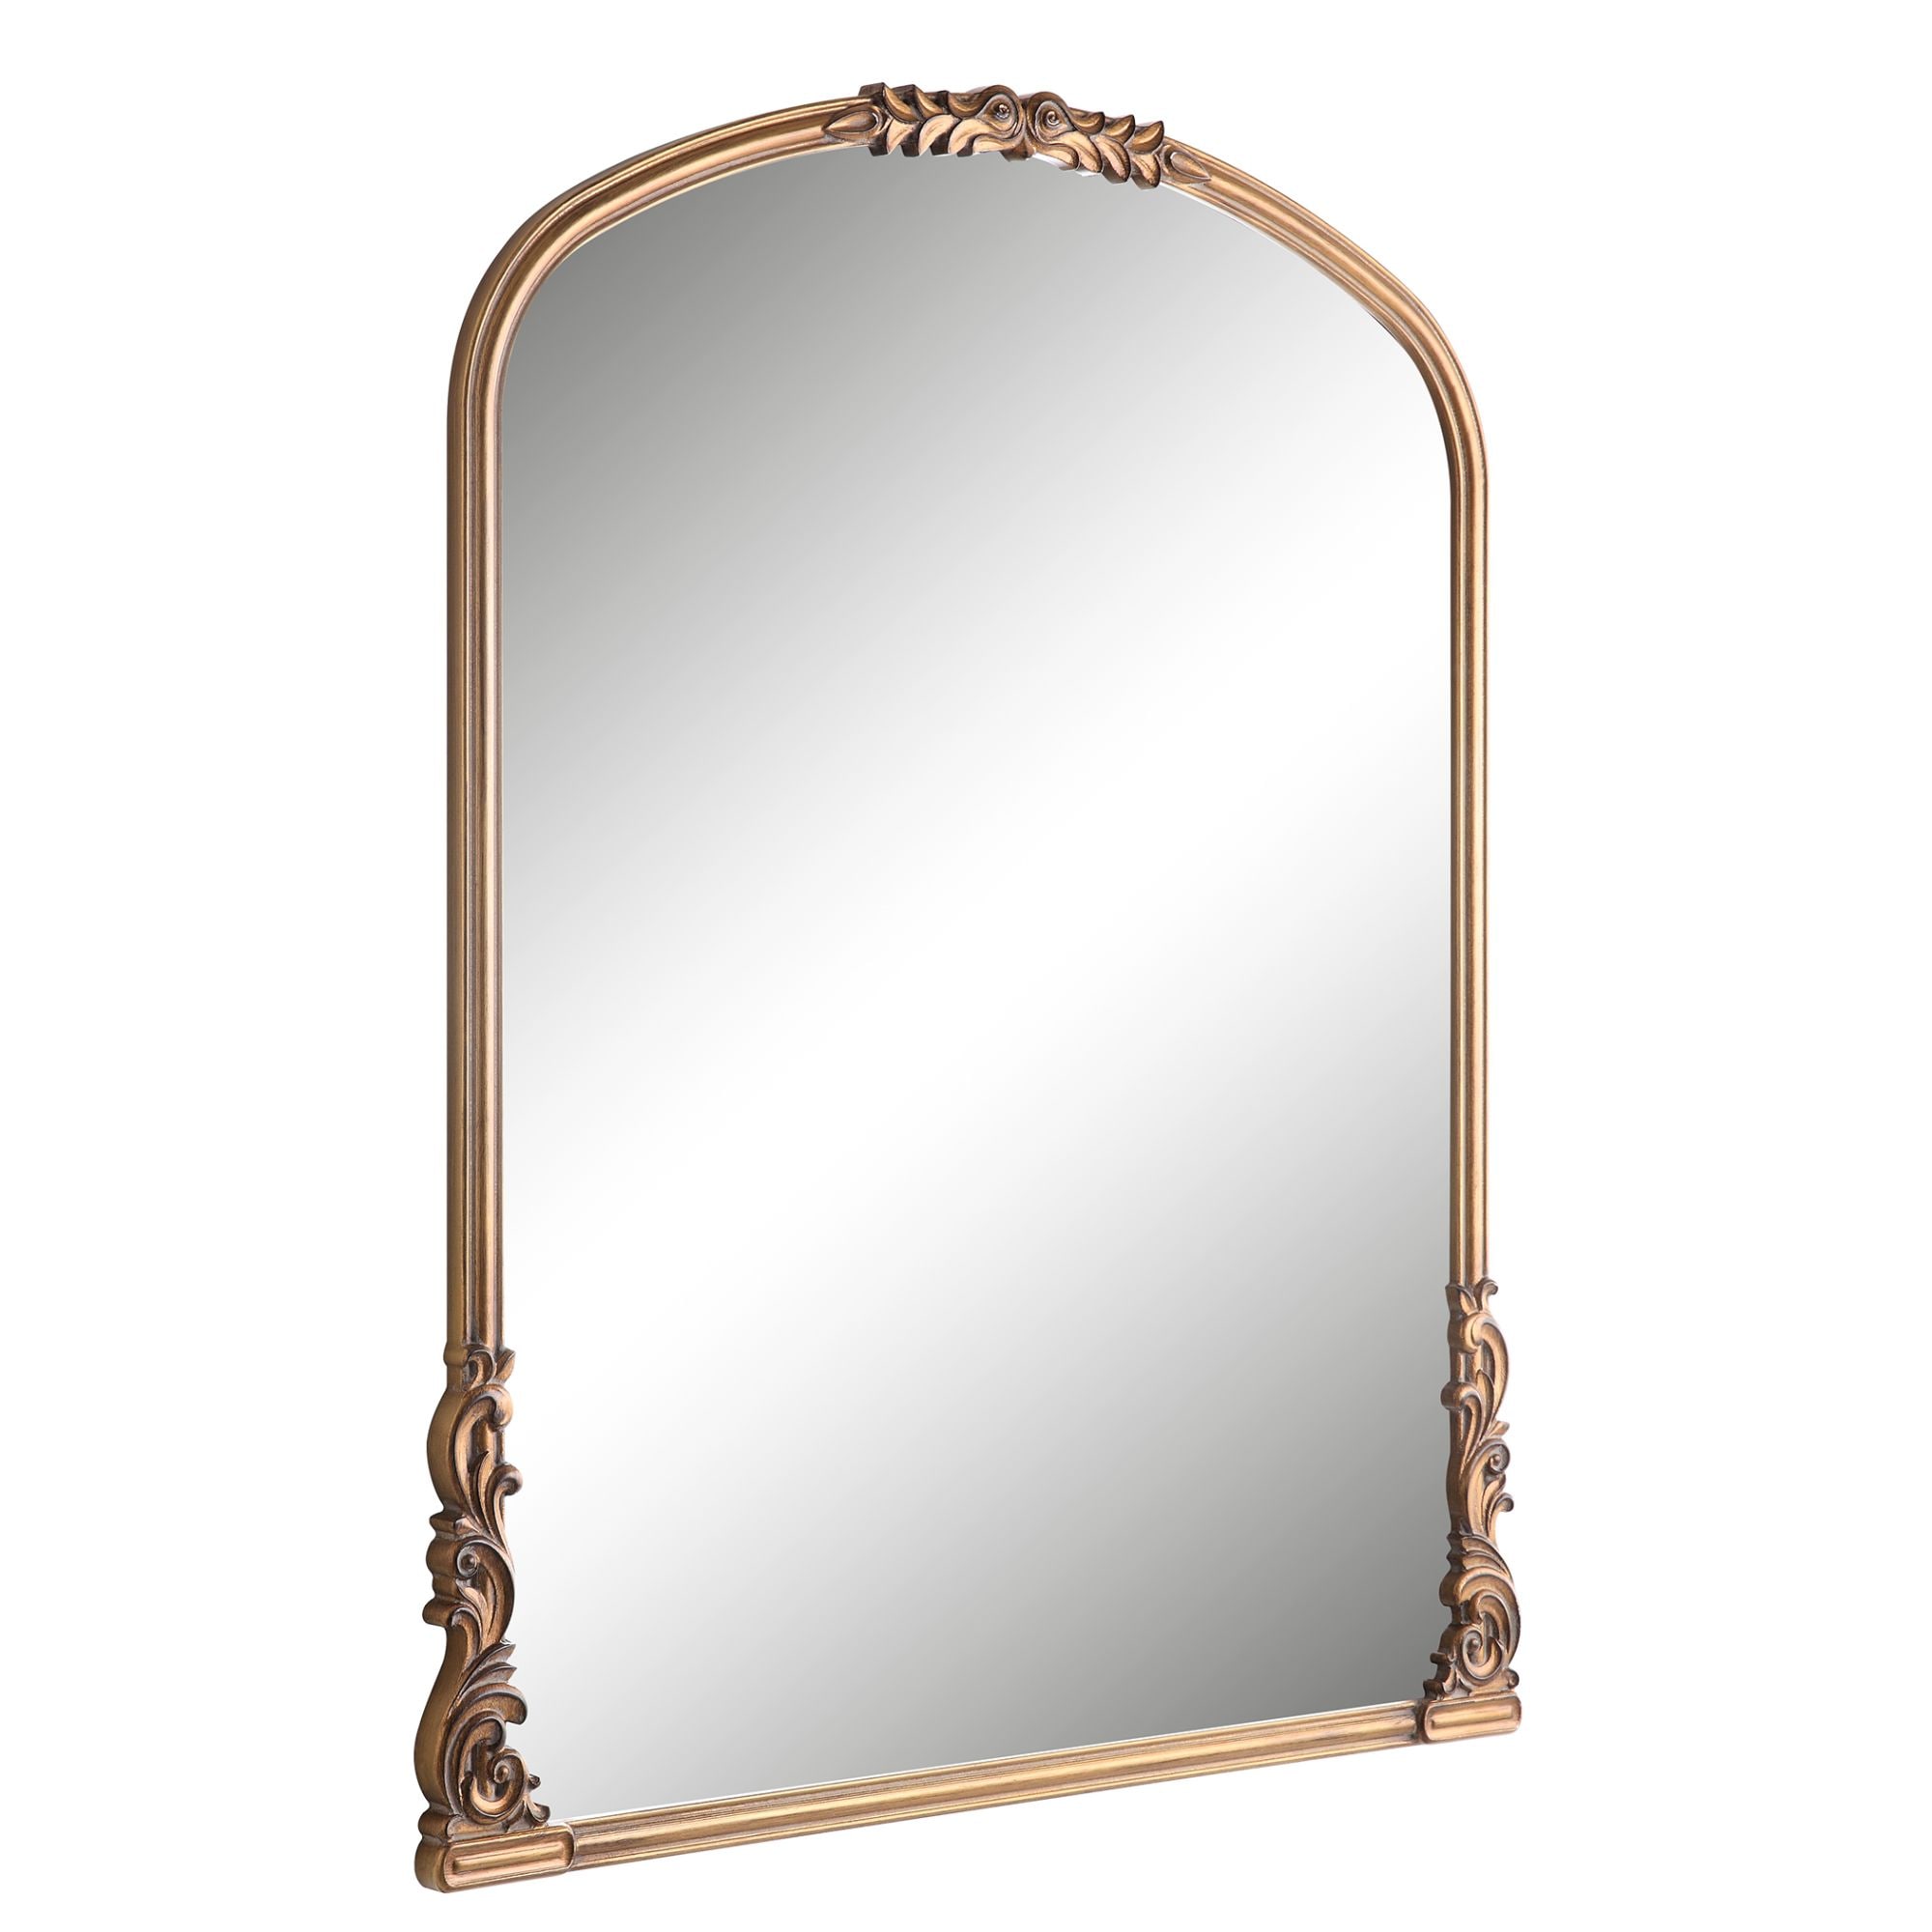 Buy TC Oval Shaped Brass Wall Mirror Frame Decorative Frame for